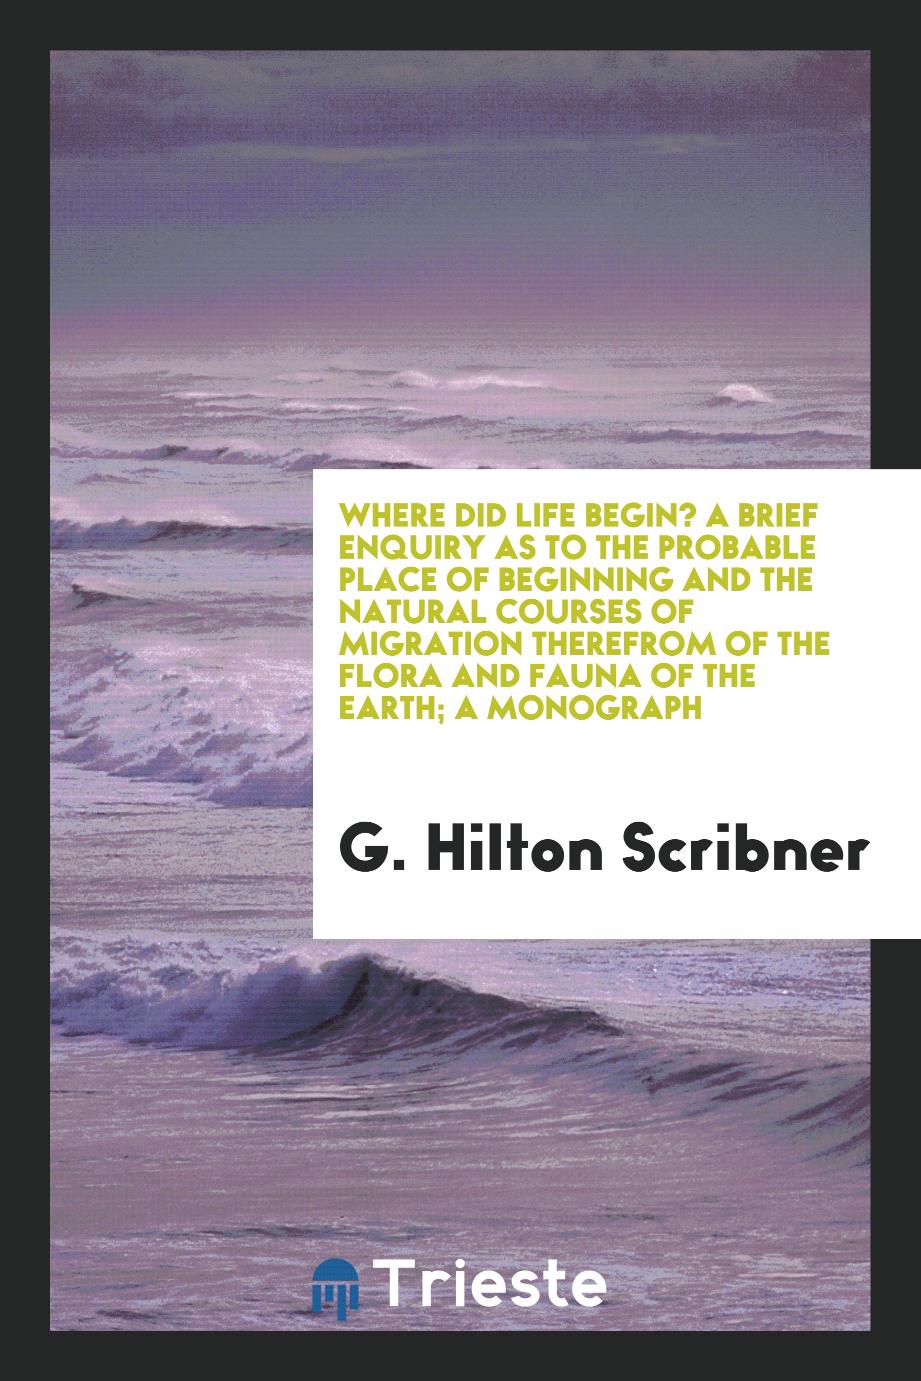 Where did life begin? A brief enquiry as to the probable place of beginning and the natural courses of migration therefrom of the flora and fauna of the earth; a monograph